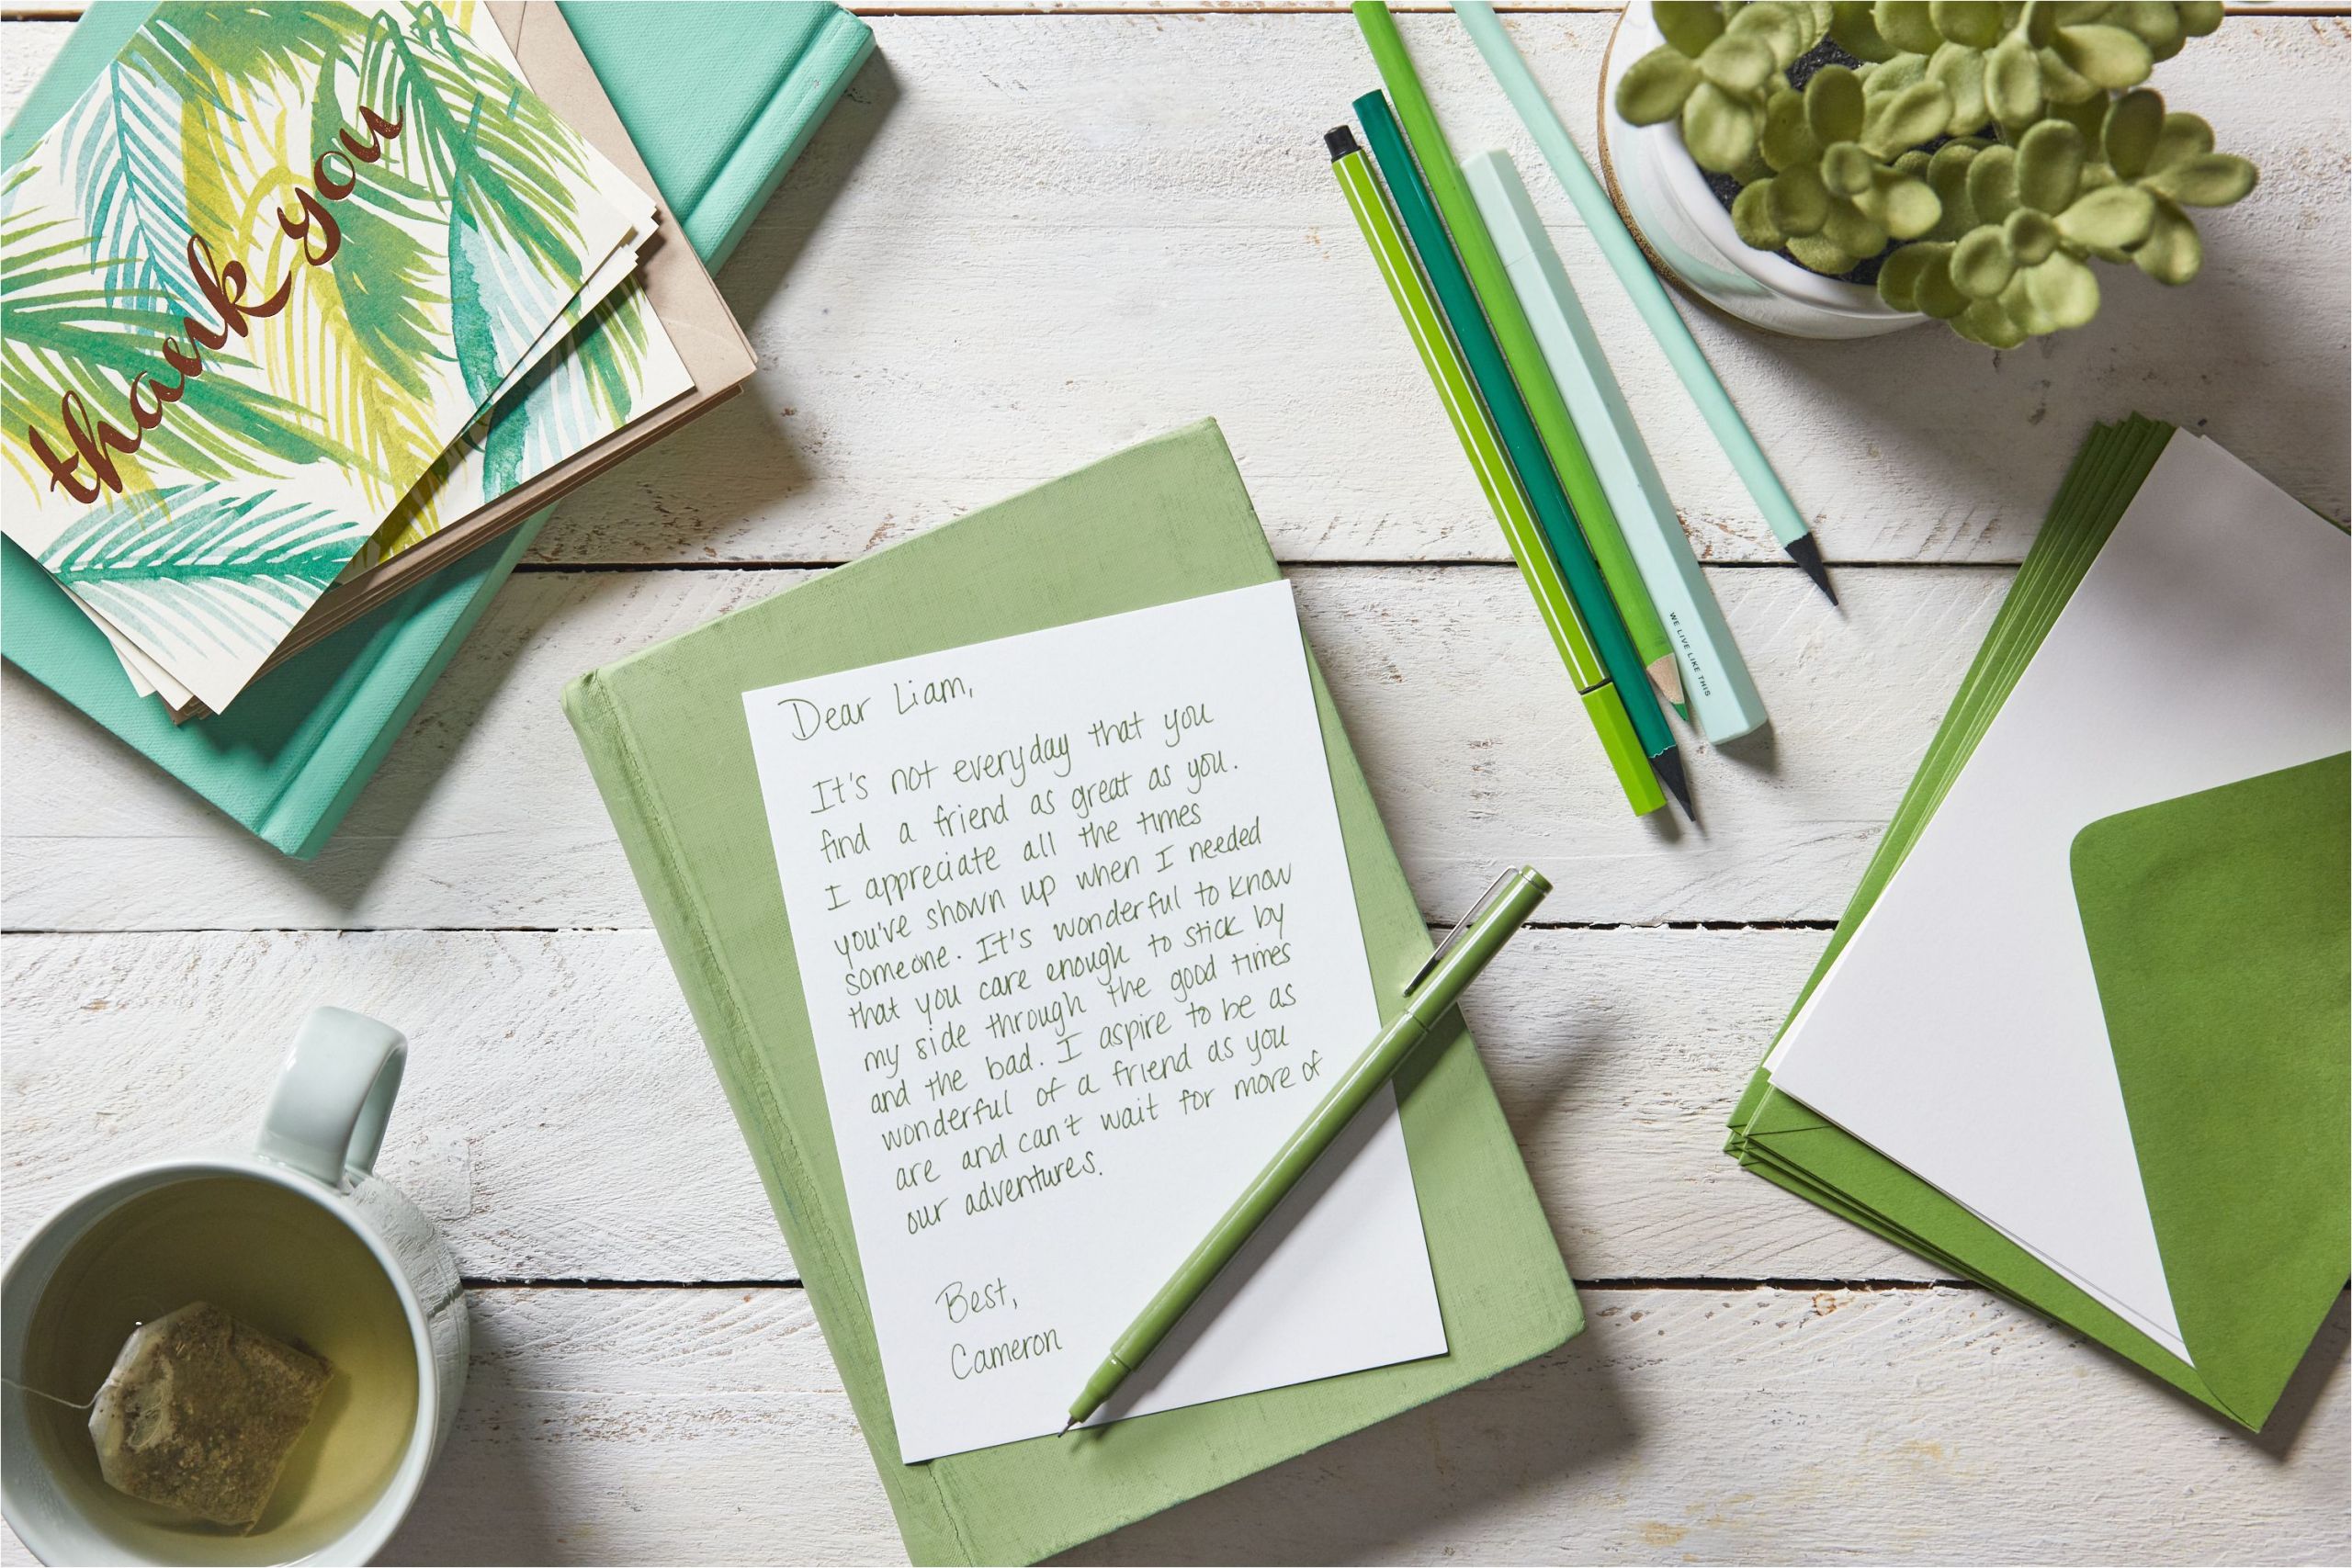 Nice Things to Say In A Thank You Card | williamson-ga.us